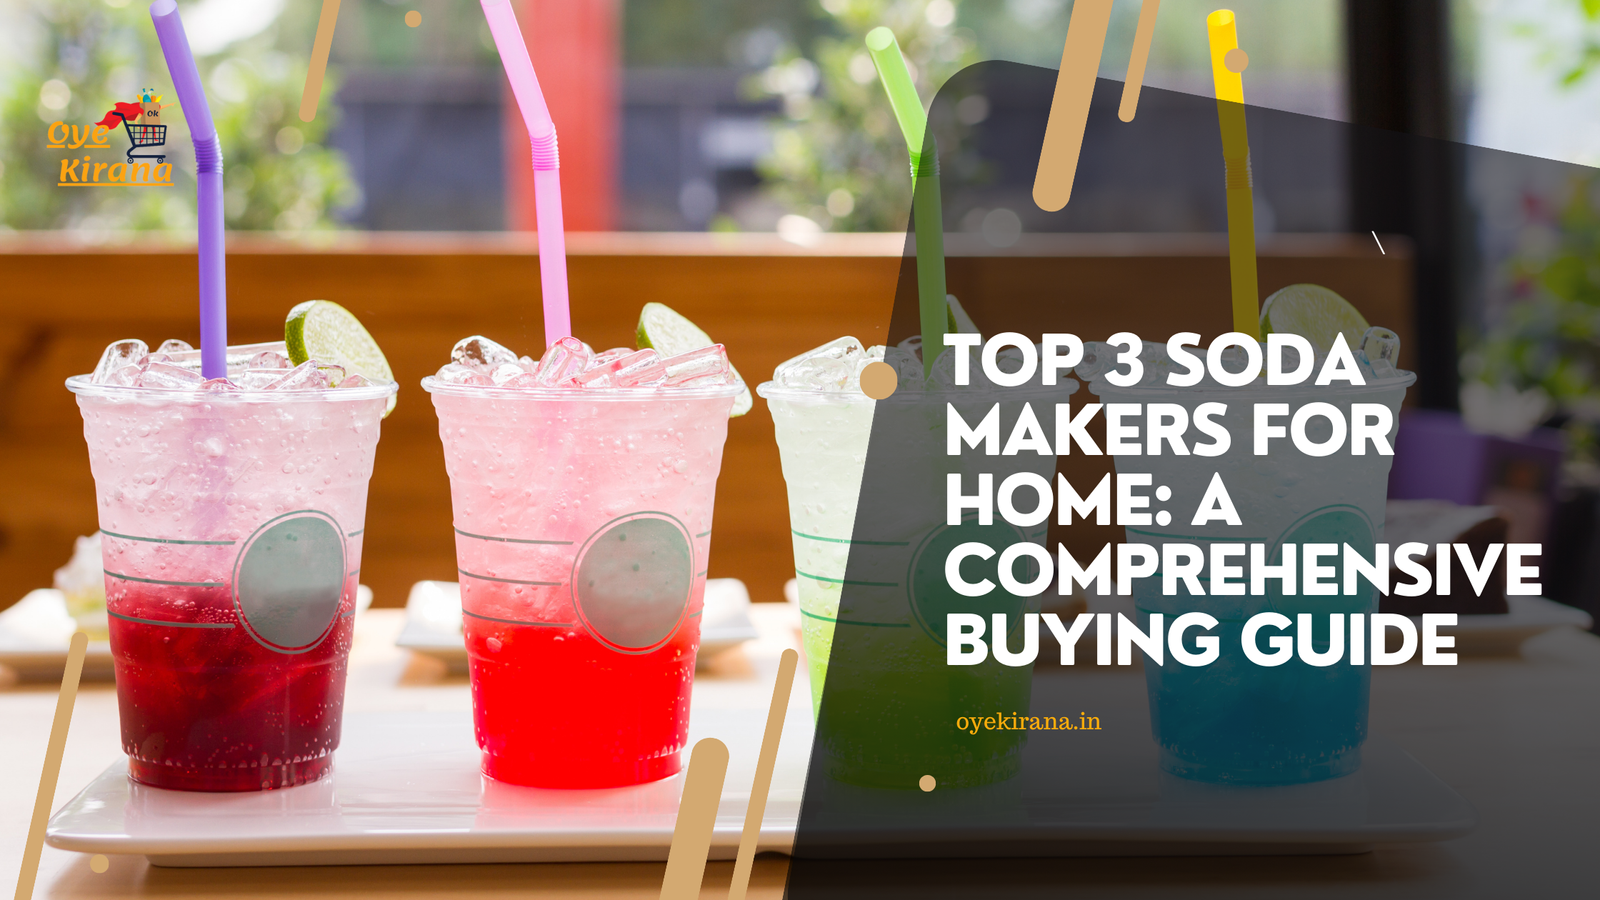 You are currently viewing Top 3 Soda Makers for Home: A Comprehensive Buying Guide